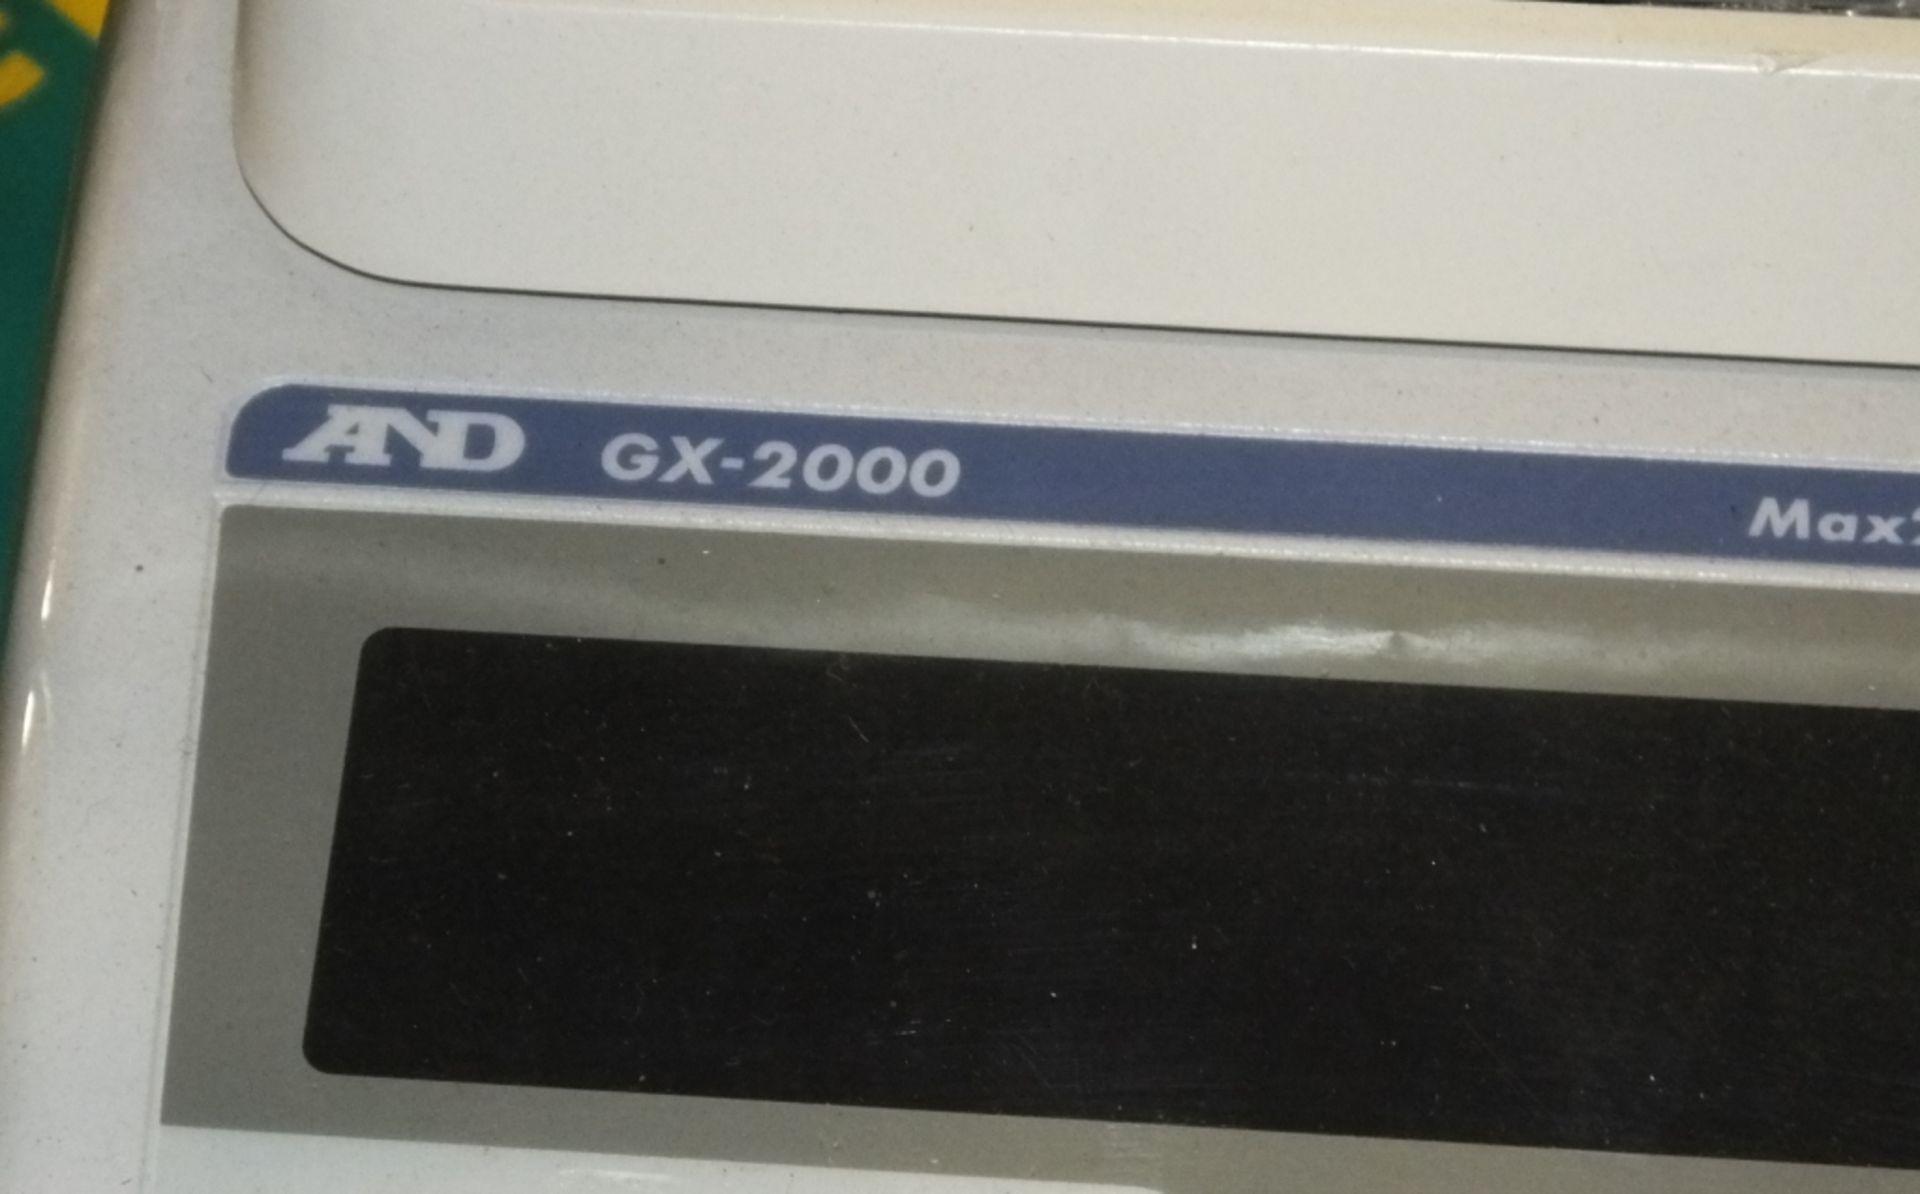 AND GX-2000 laboratory digital scales - Image 2 of 3